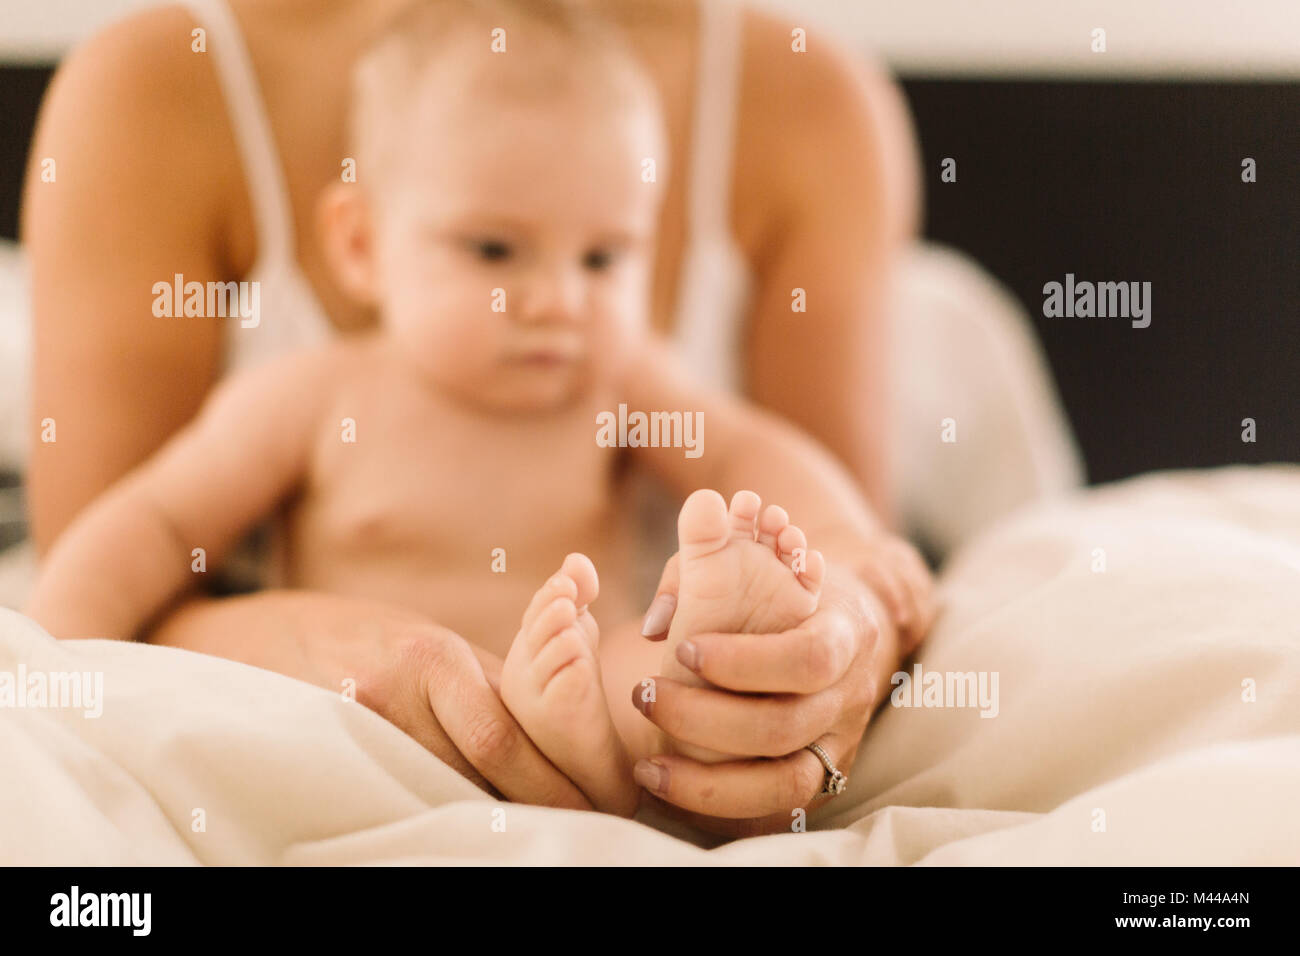 Woman holding baby daughters bare feet on bed, close up Stock Photo